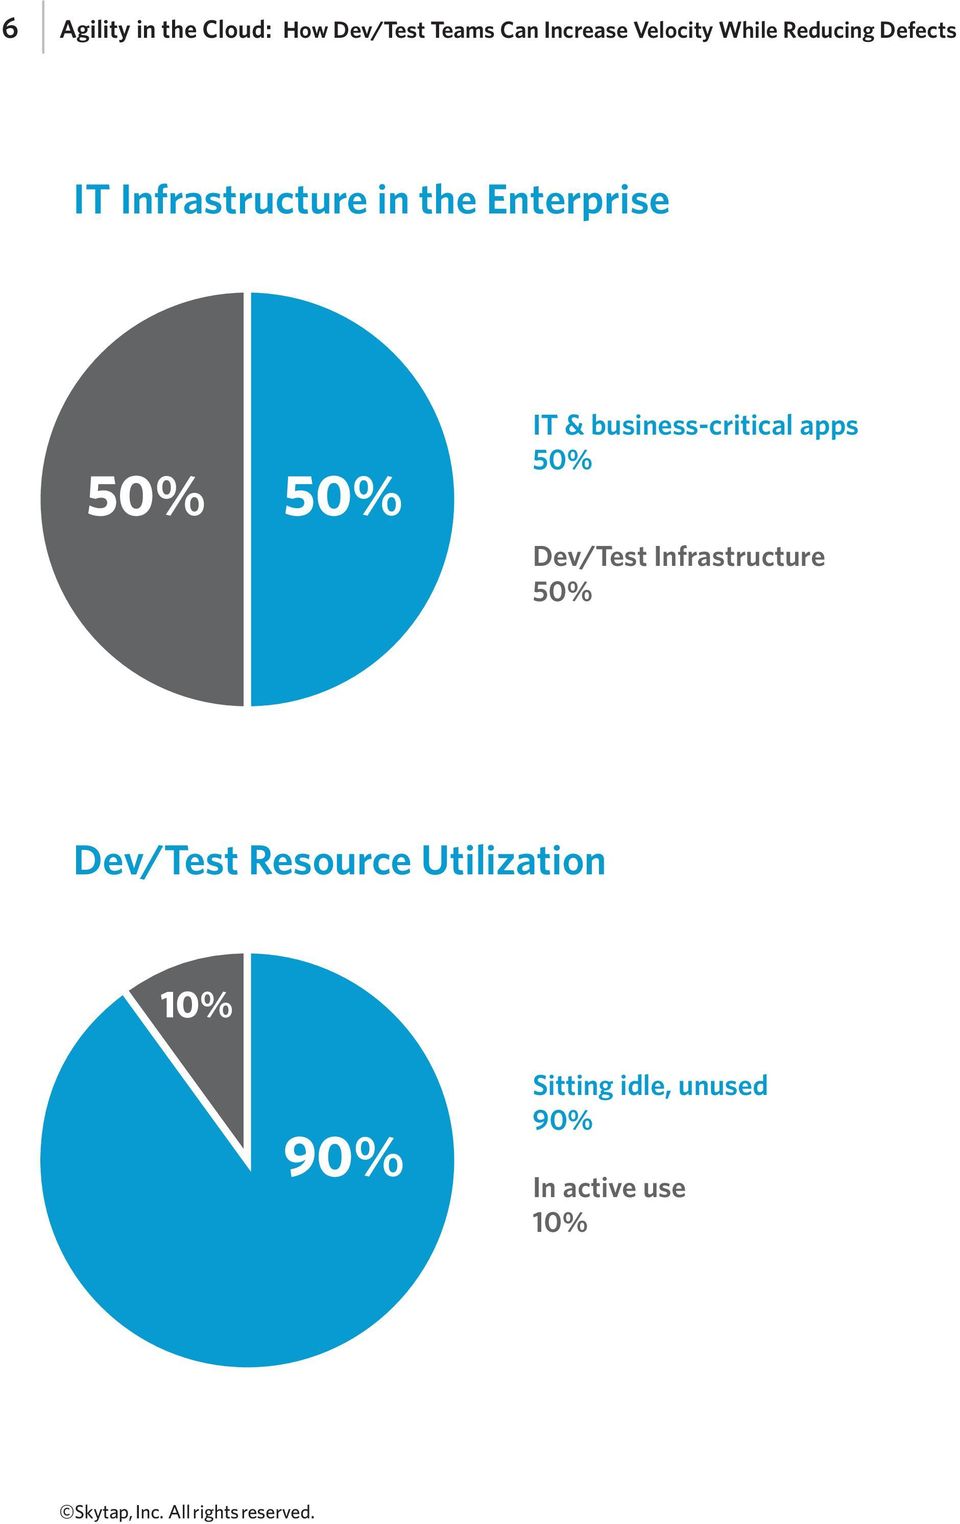 IT & business-critical apps 50% Dev/Test Infrastructure 50%